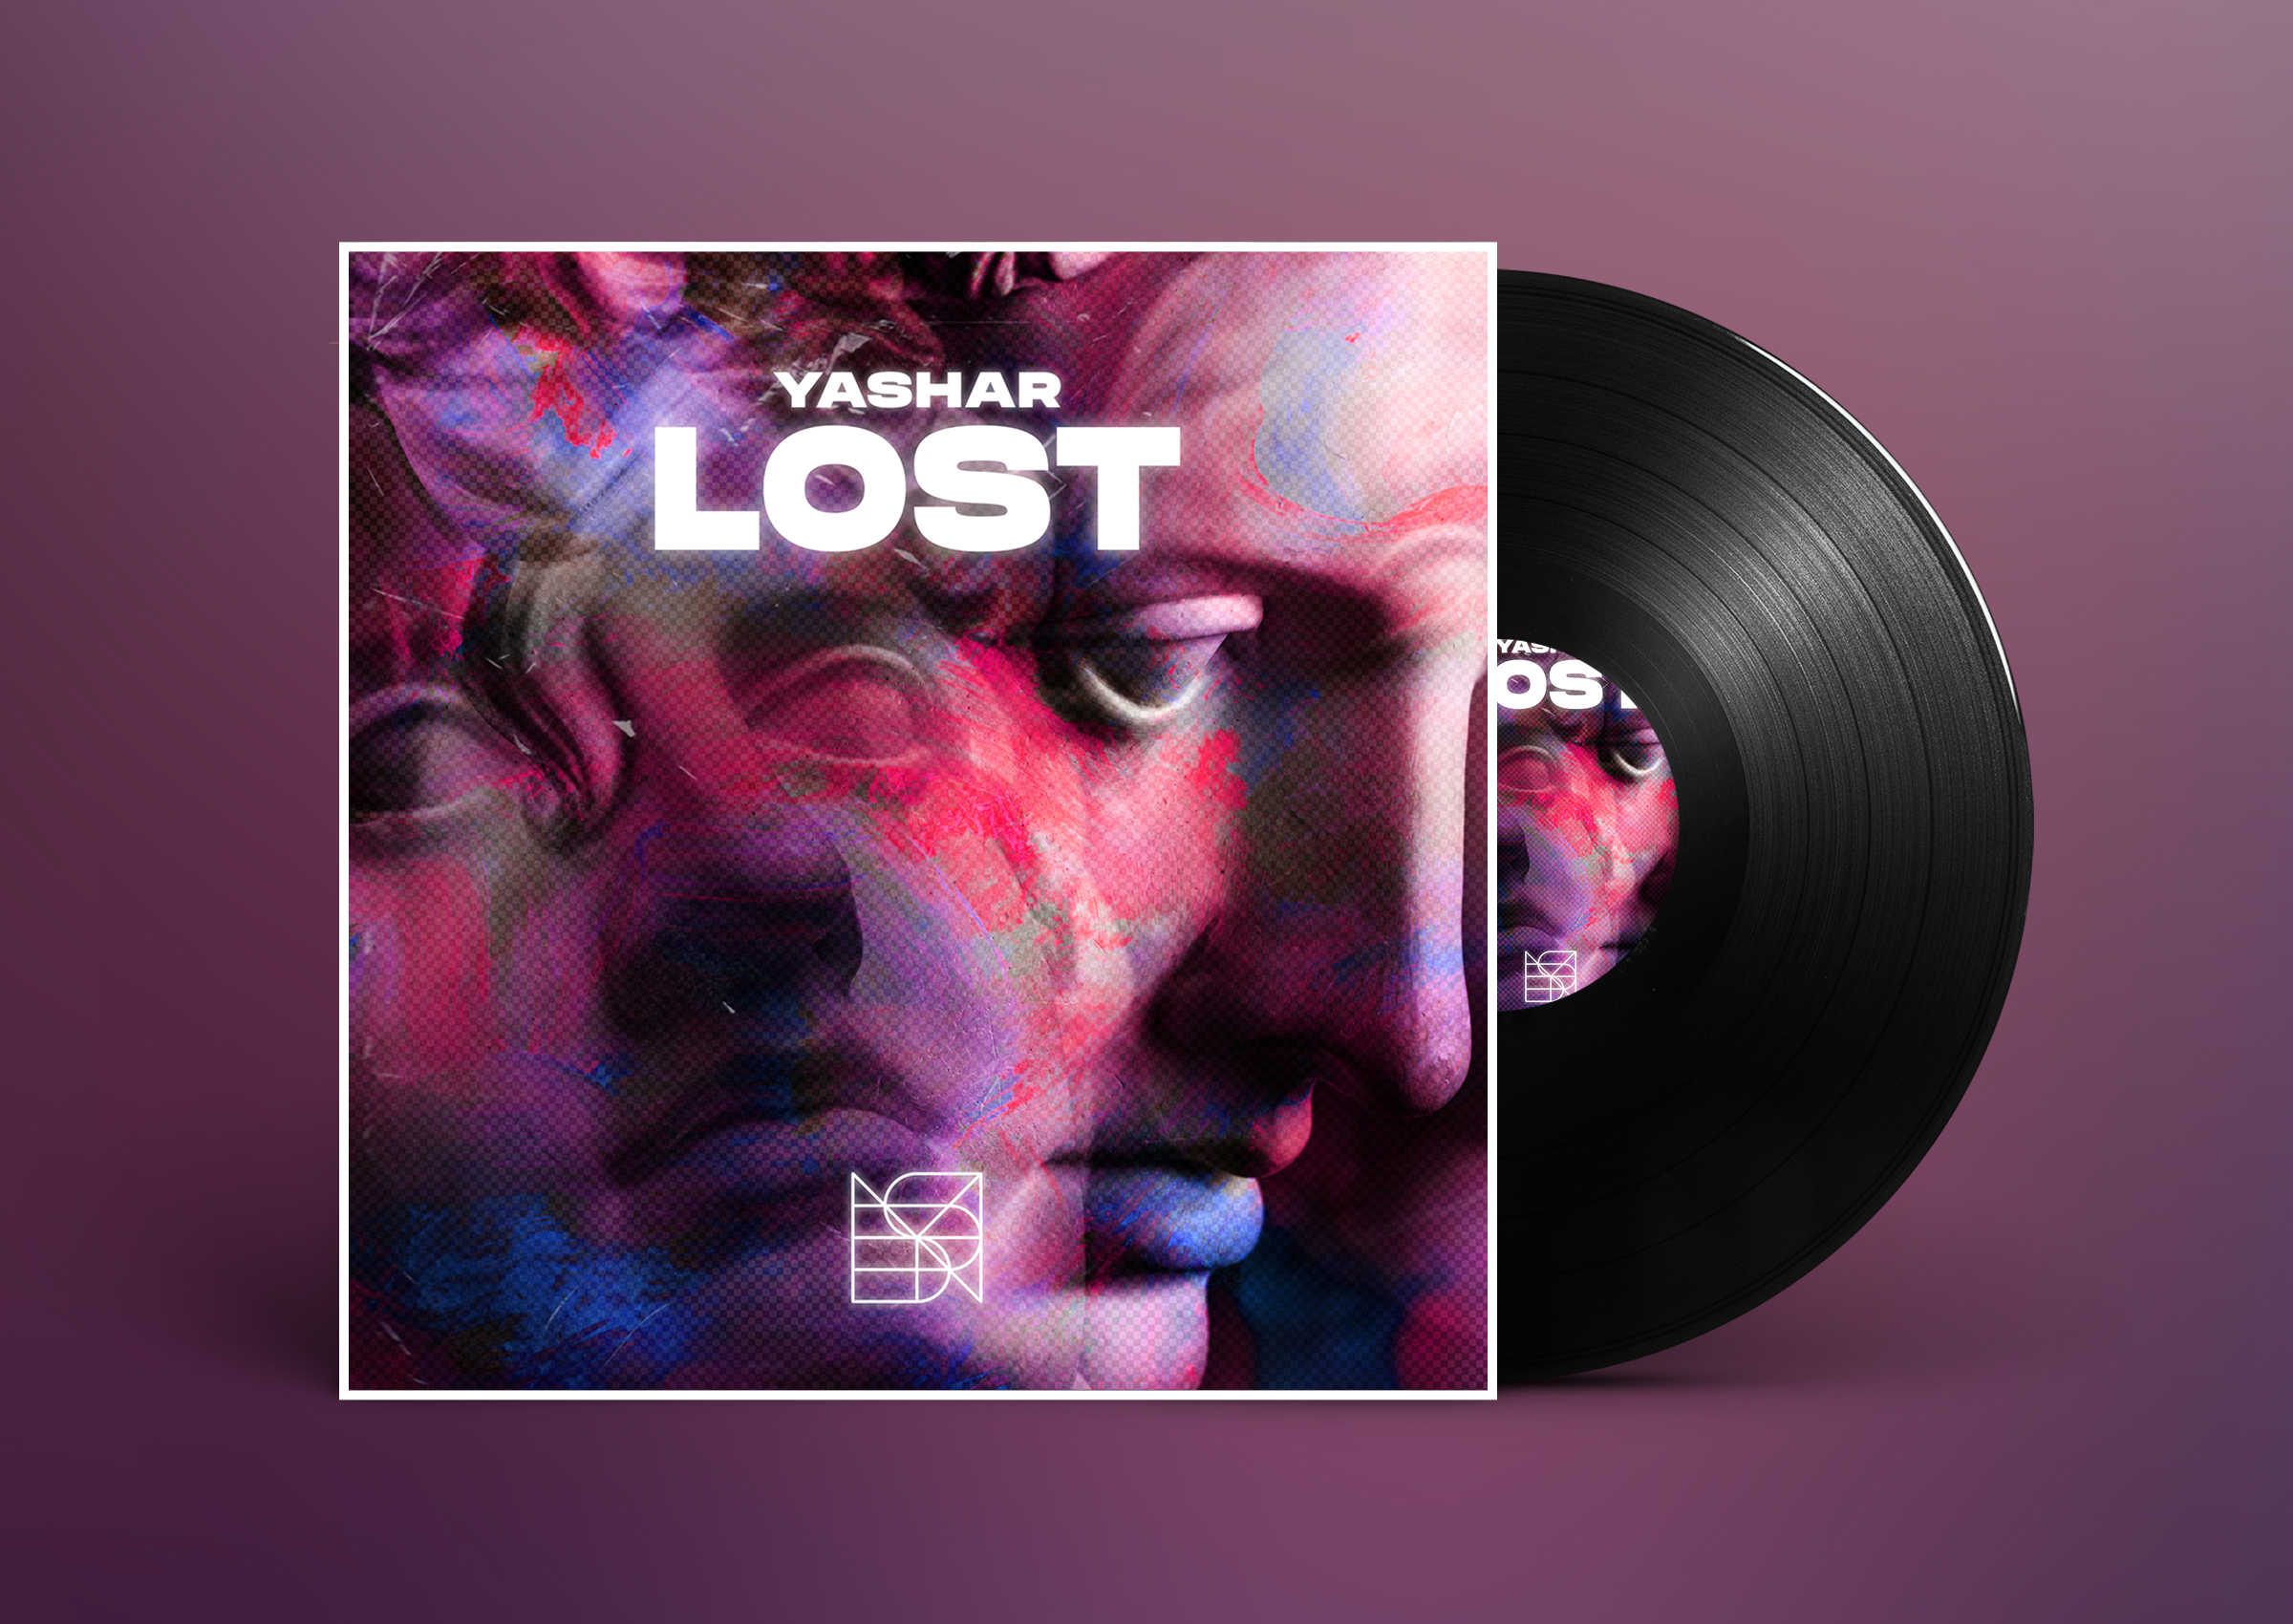 “Lost” is a hot new track from ‘Yashar’ that’s about delusion and talks directly to the listeners.